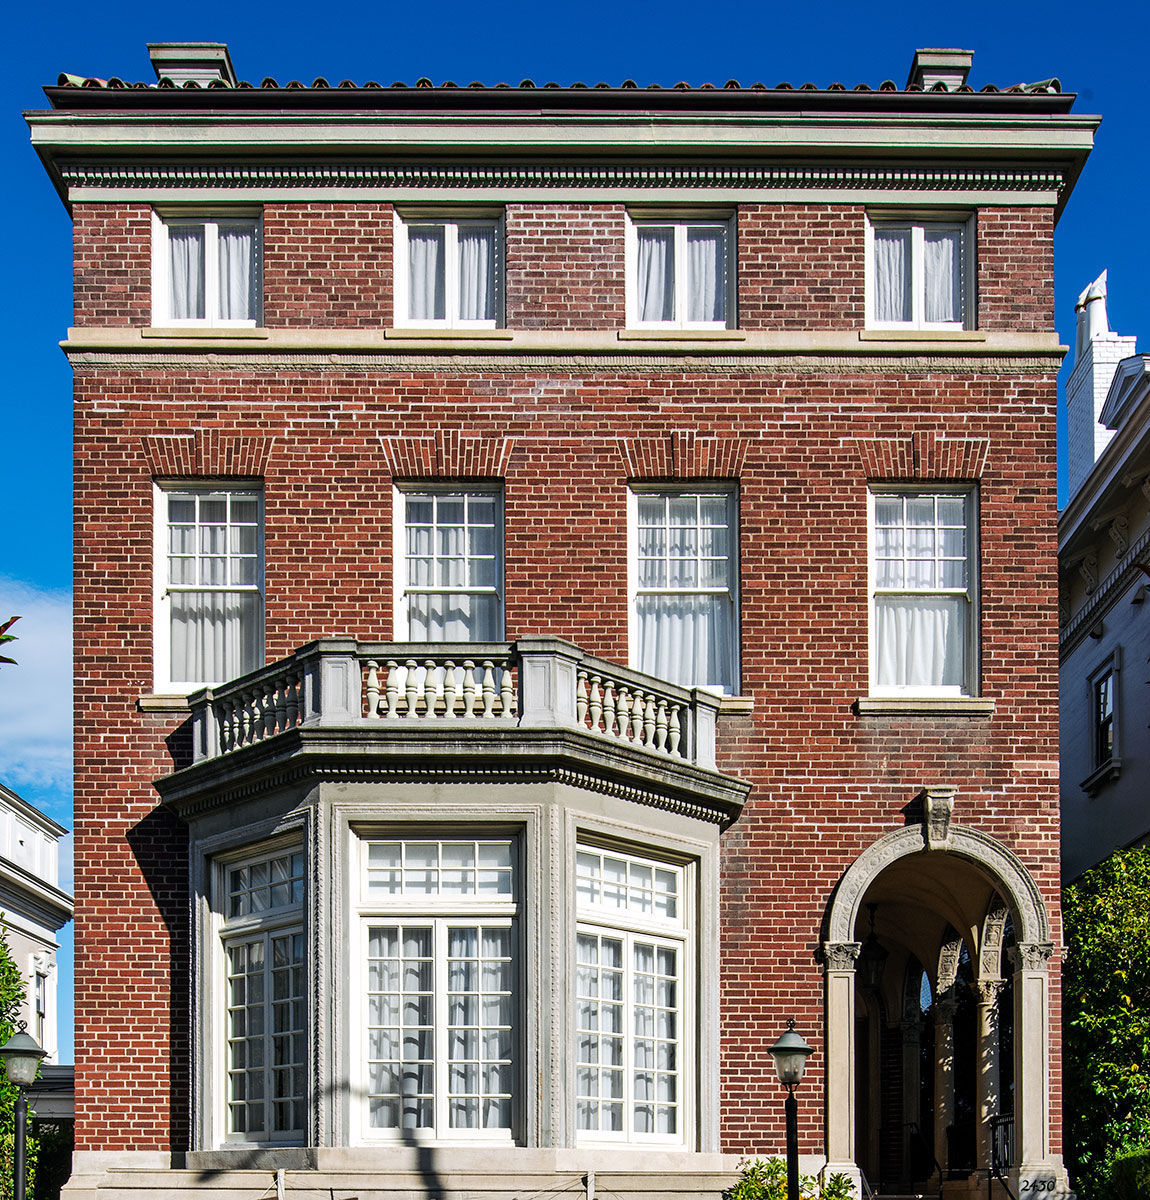 2430 Pacific Avenue in Pacific Heights was designed by Frederick H. Meyer and built in 1917.